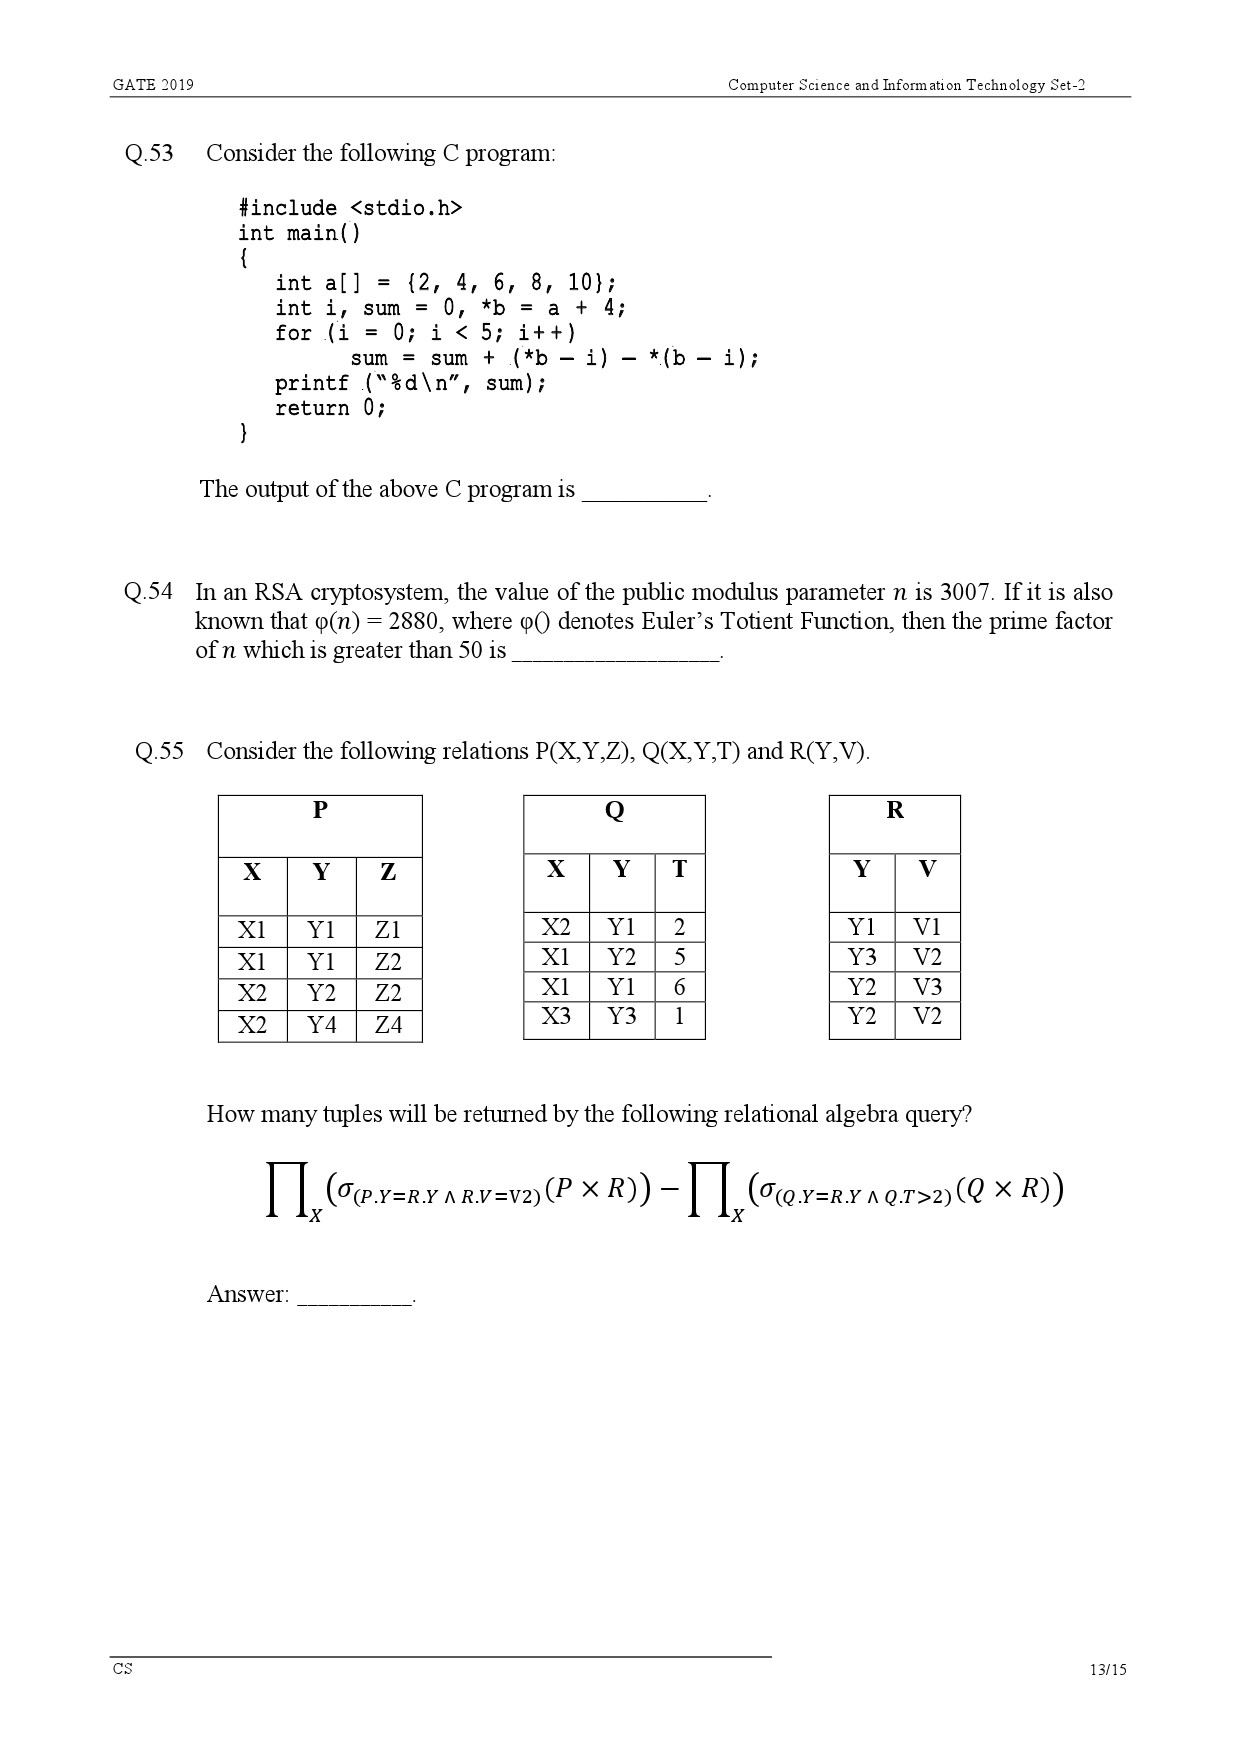 GATE Exam Question Paper 2019 Computer Science and Information Technology 16